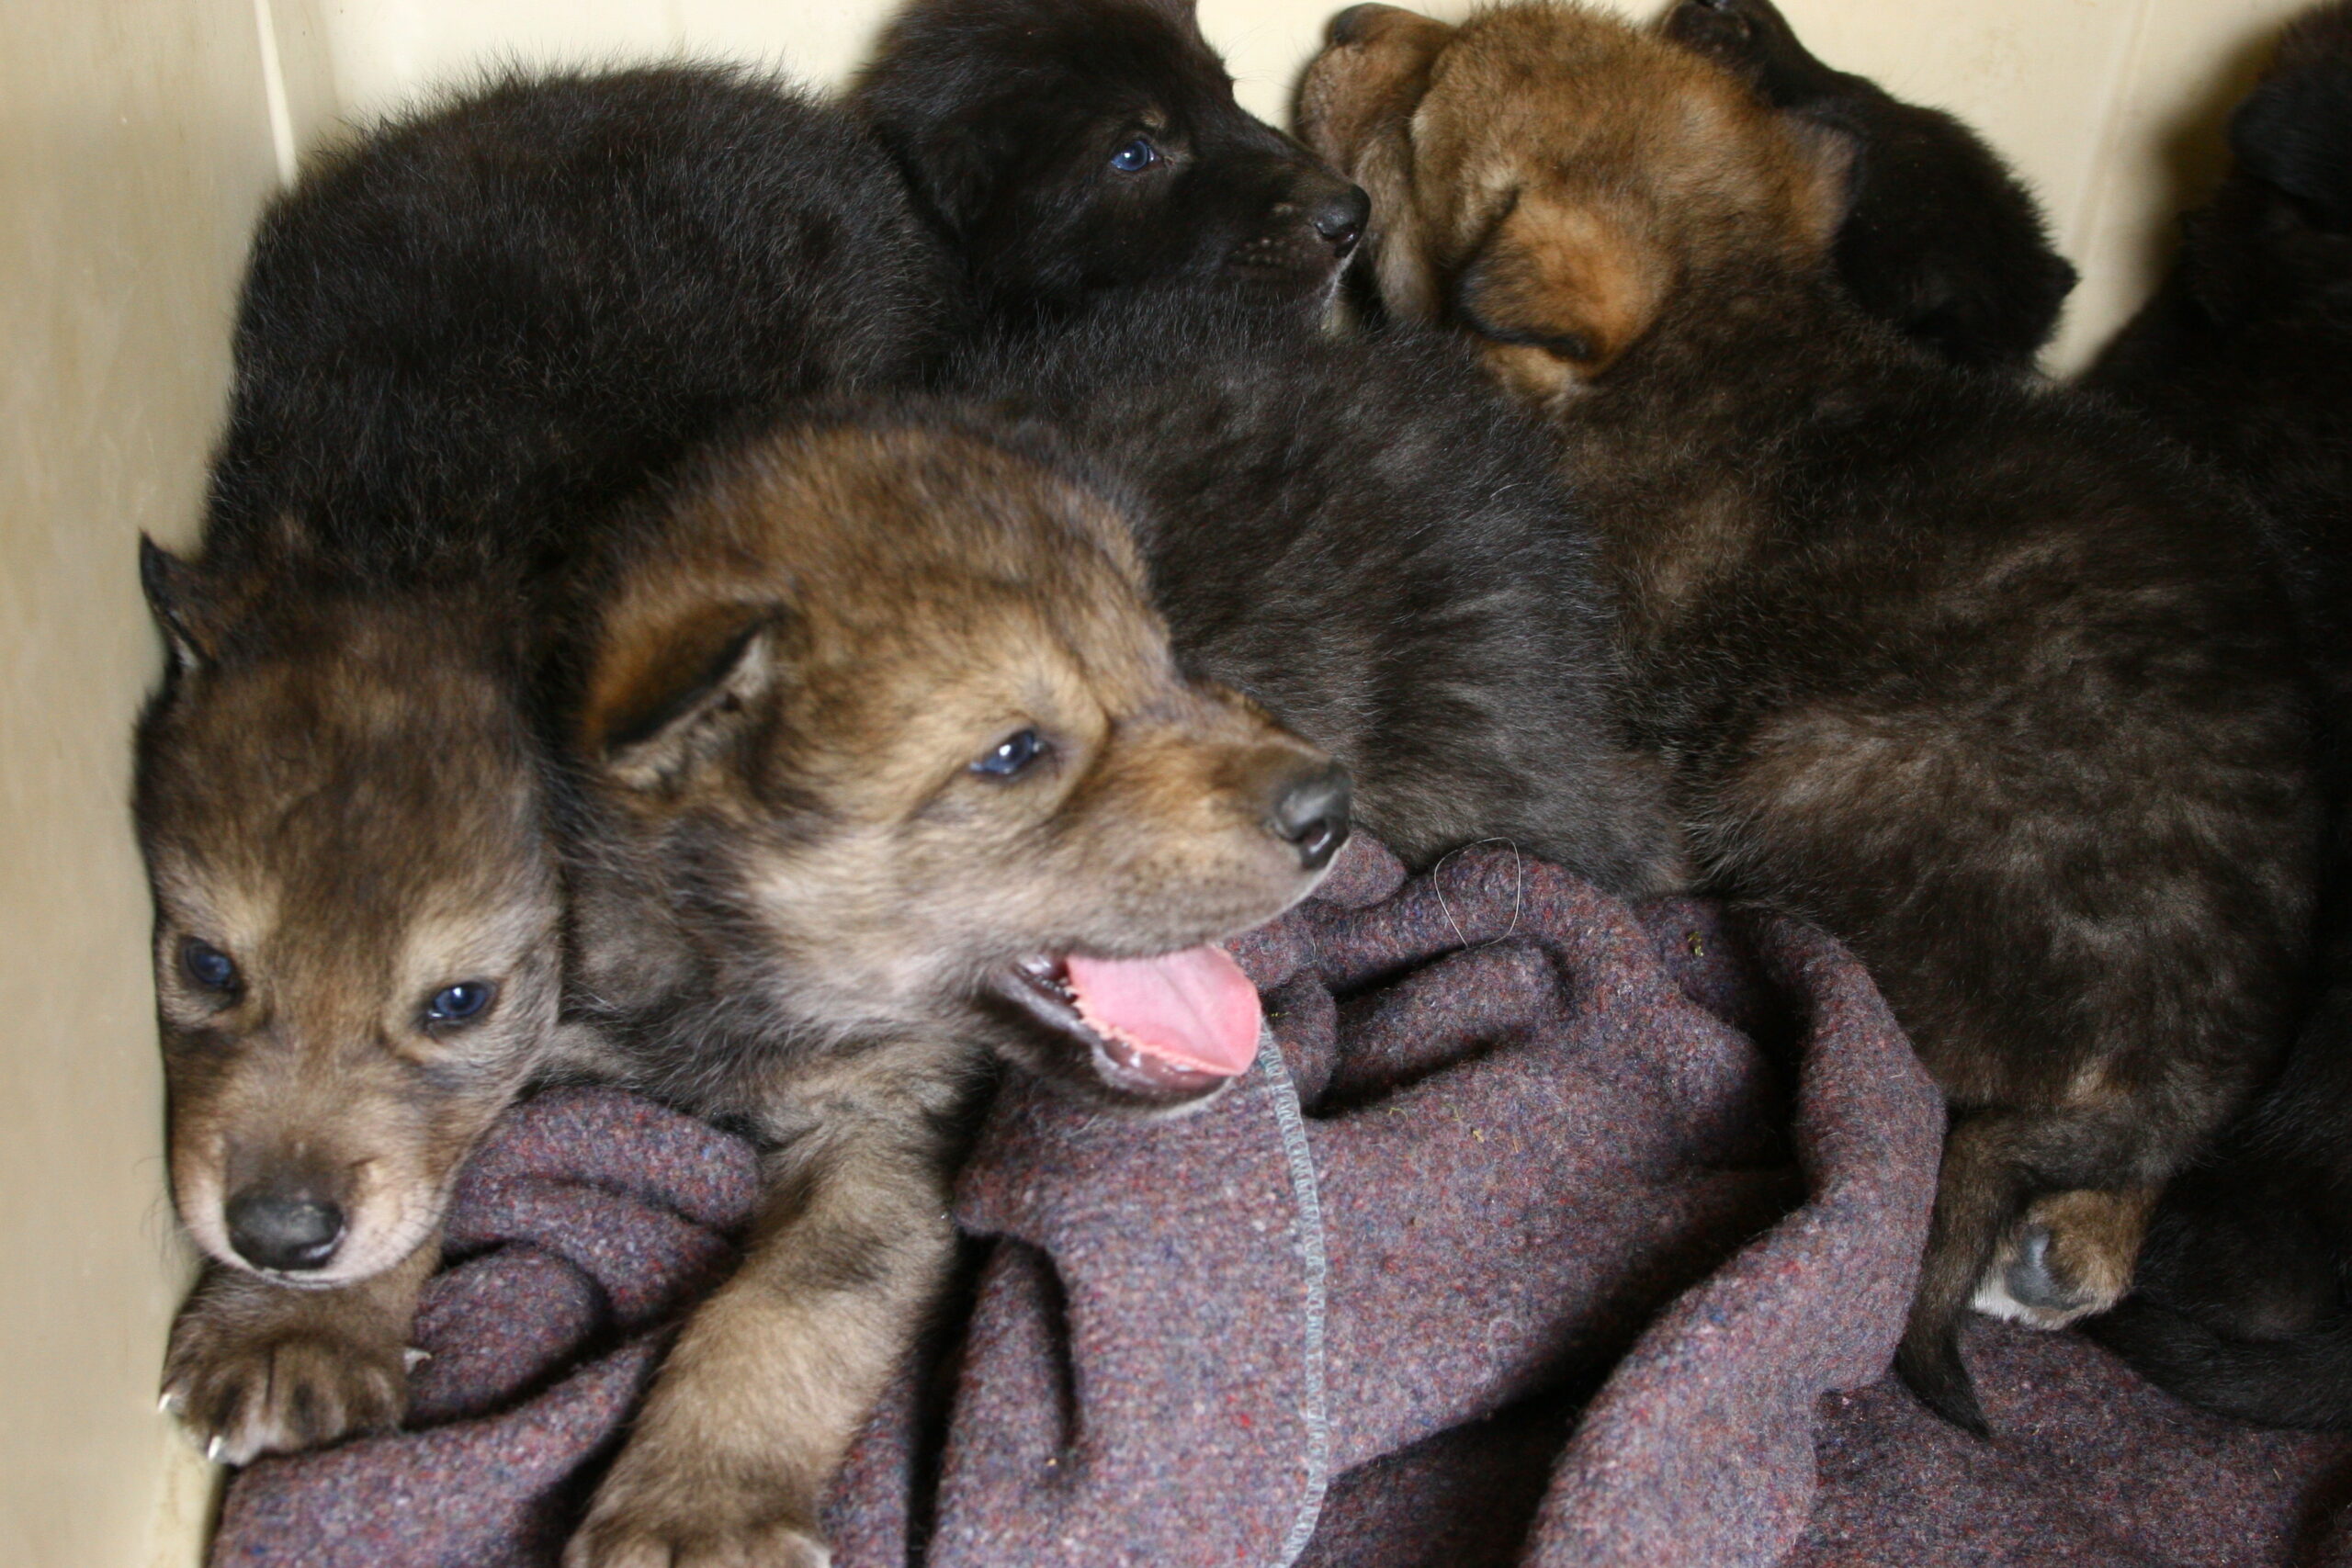 Wolf pups on a towel or blanket.